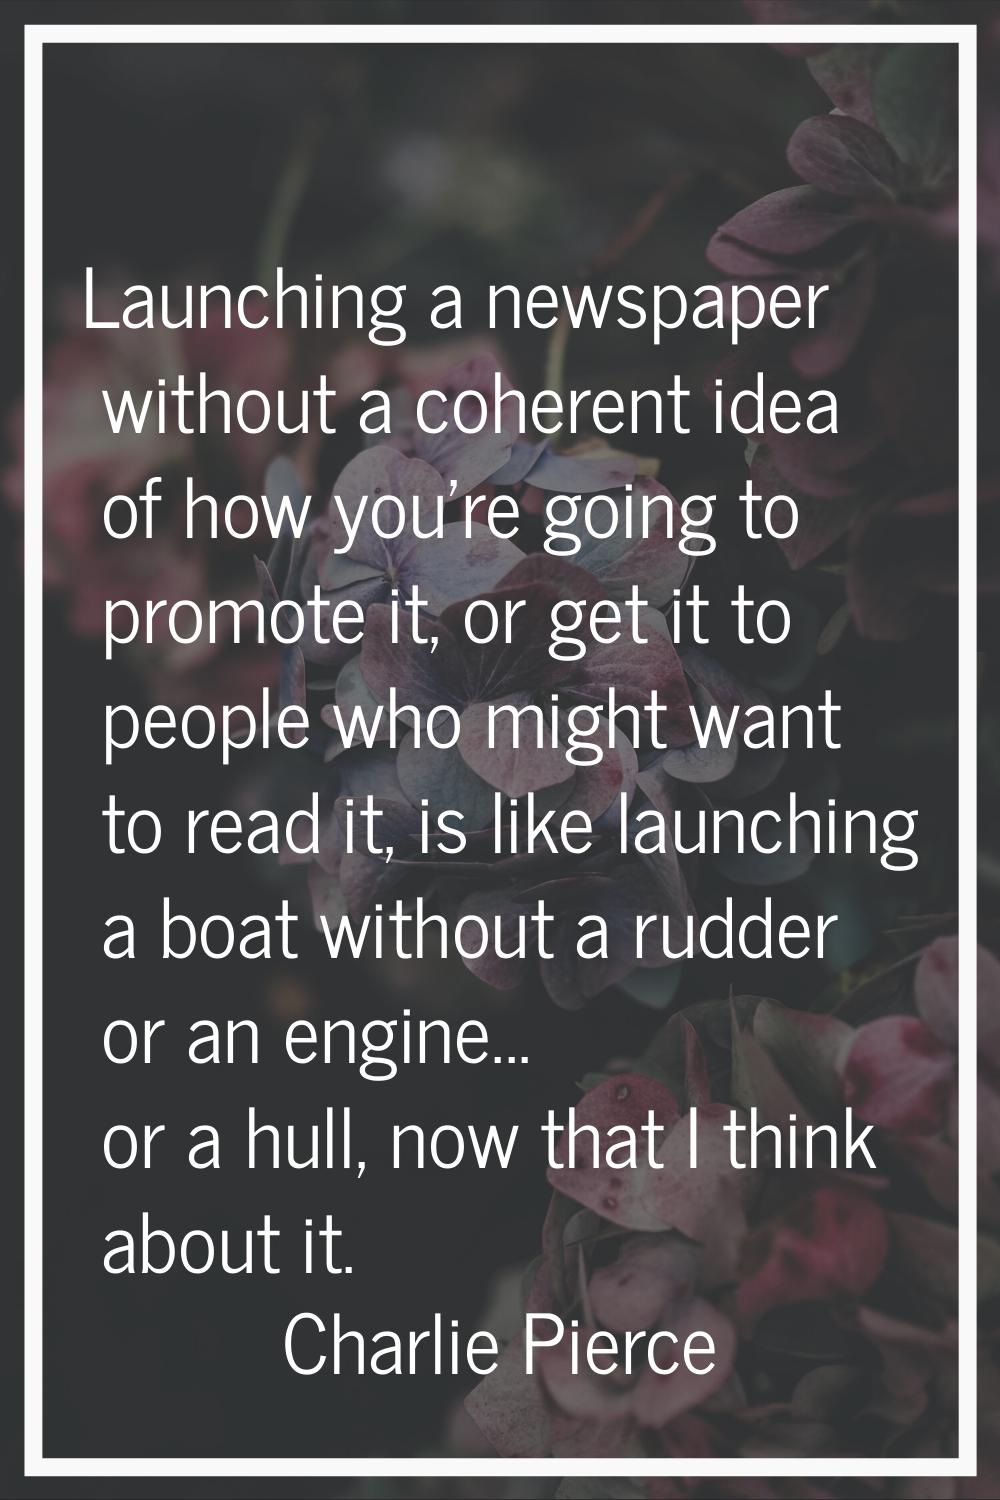 Launching a newspaper without a coherent idea of how you're going to promote it, or get it to peopl